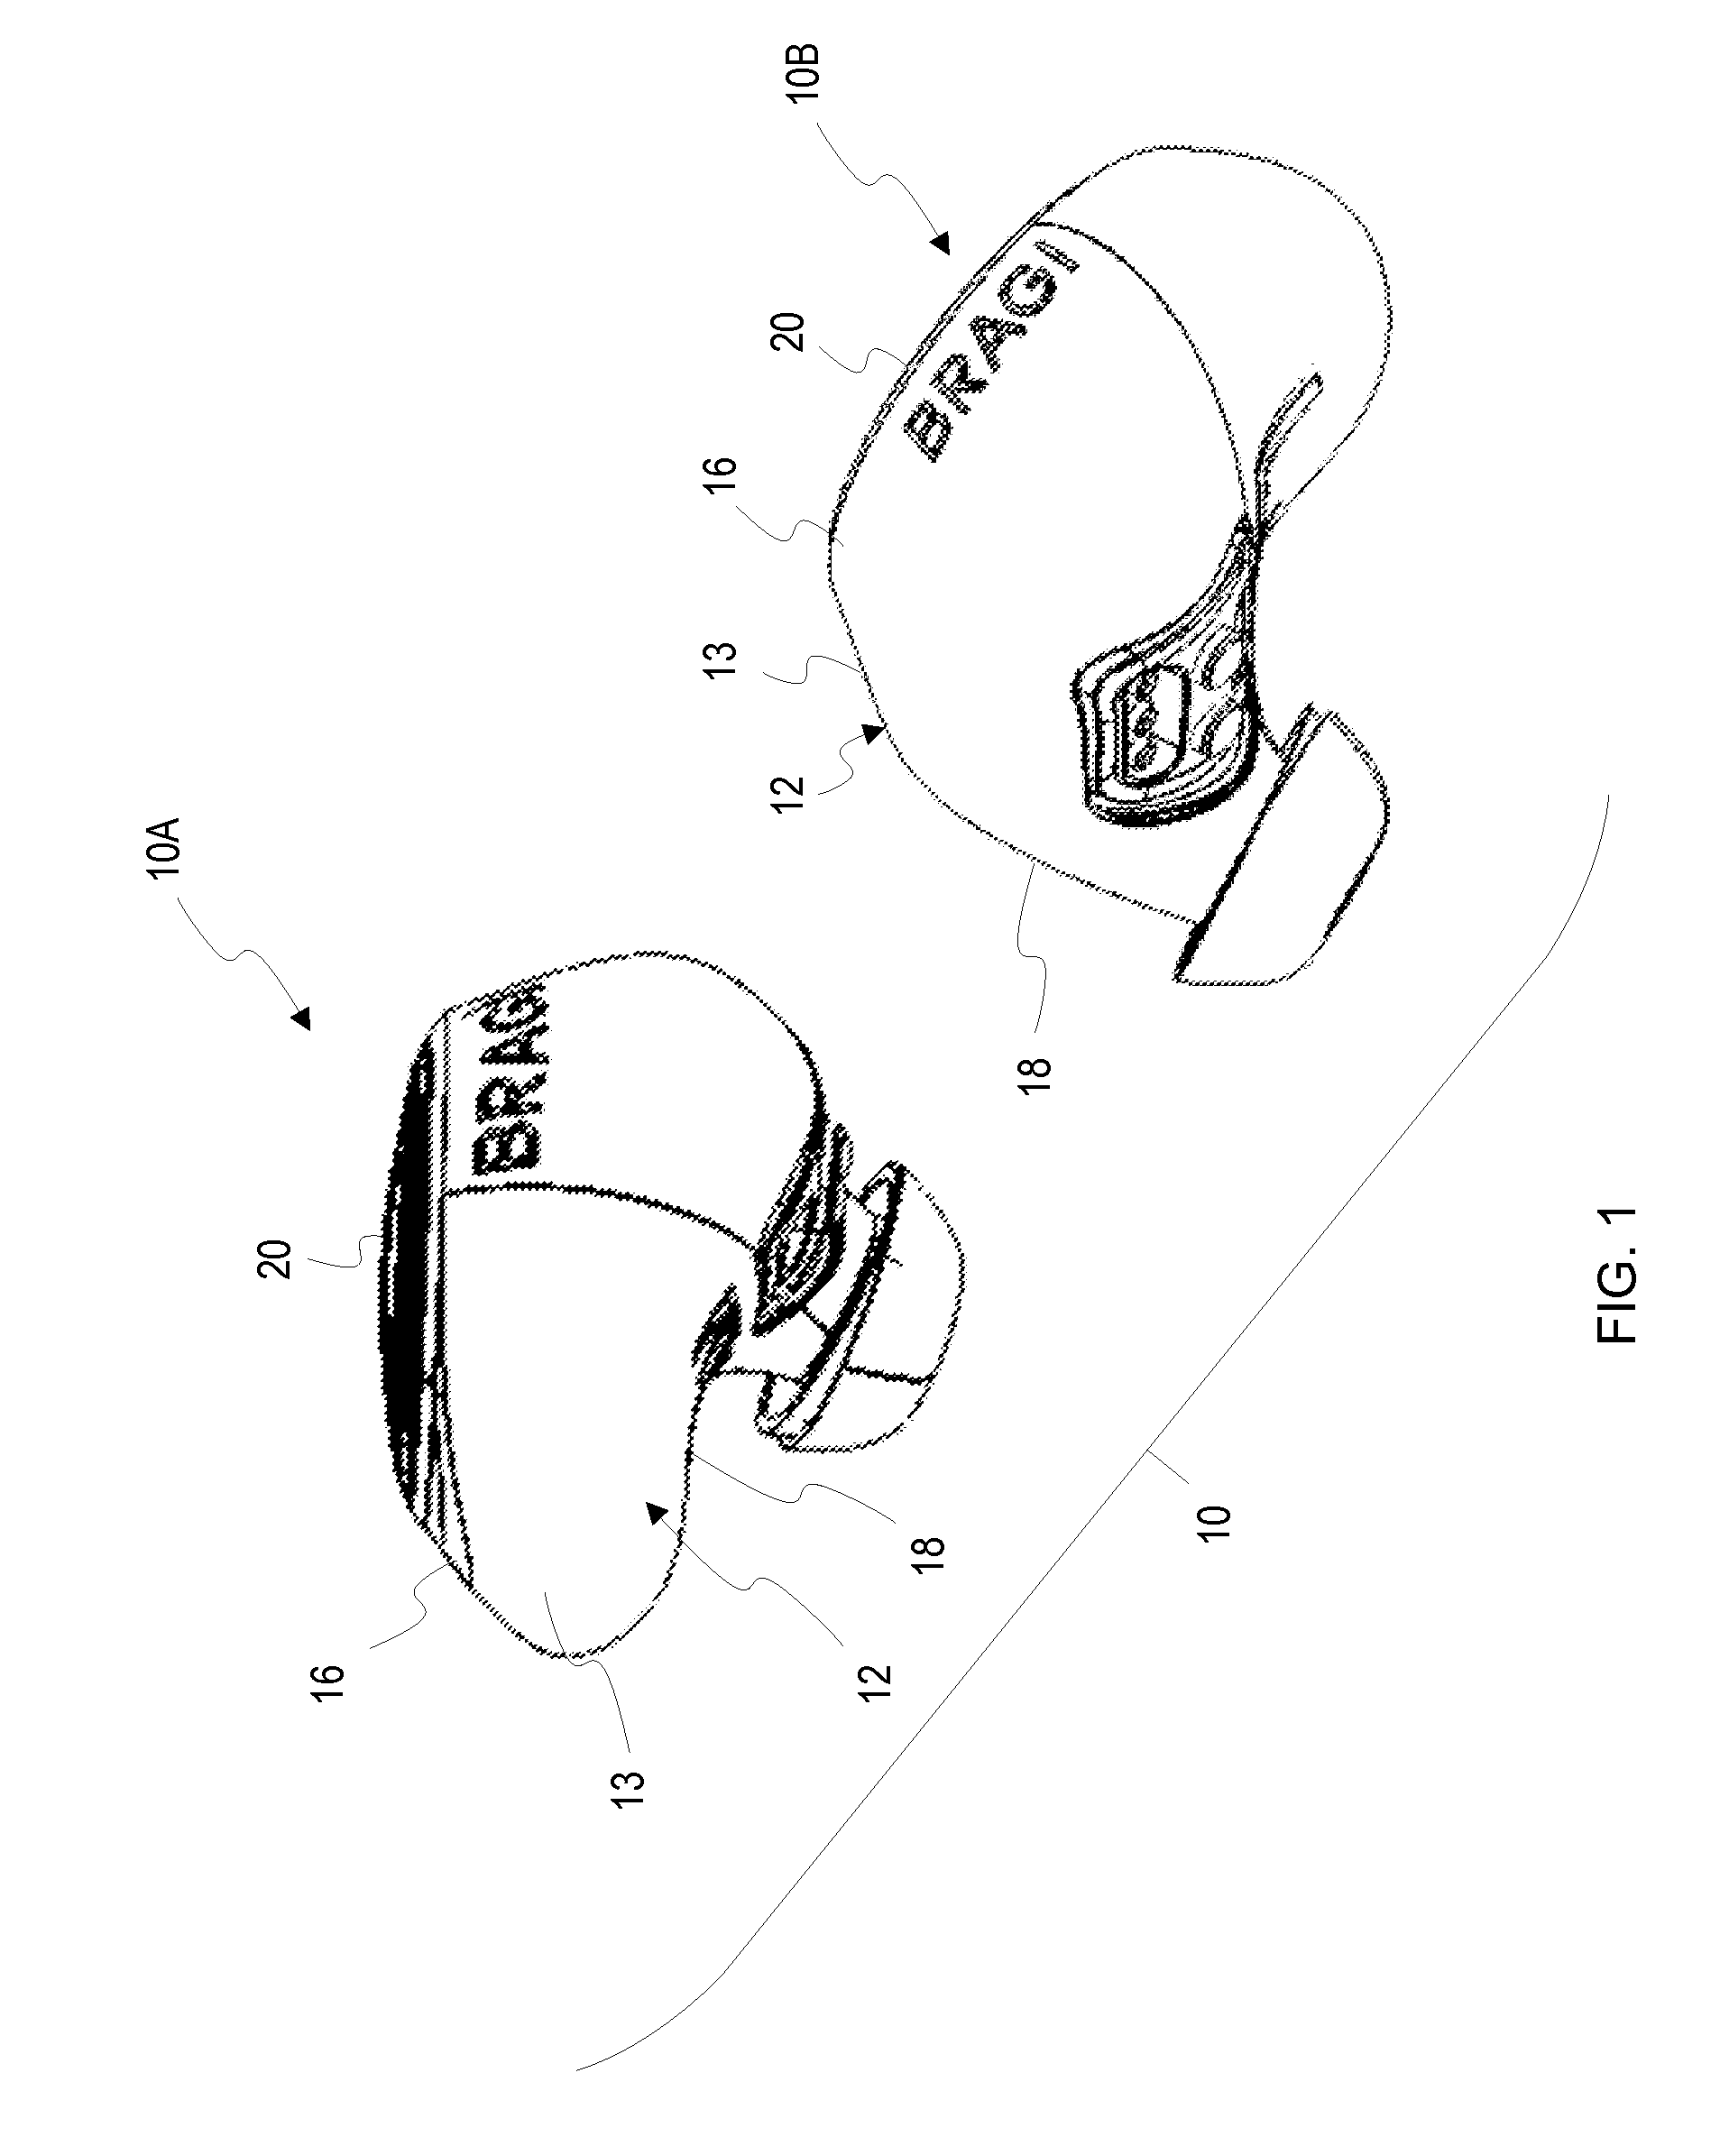 Magnetic Induction Antenna for Use in a Wearable Device